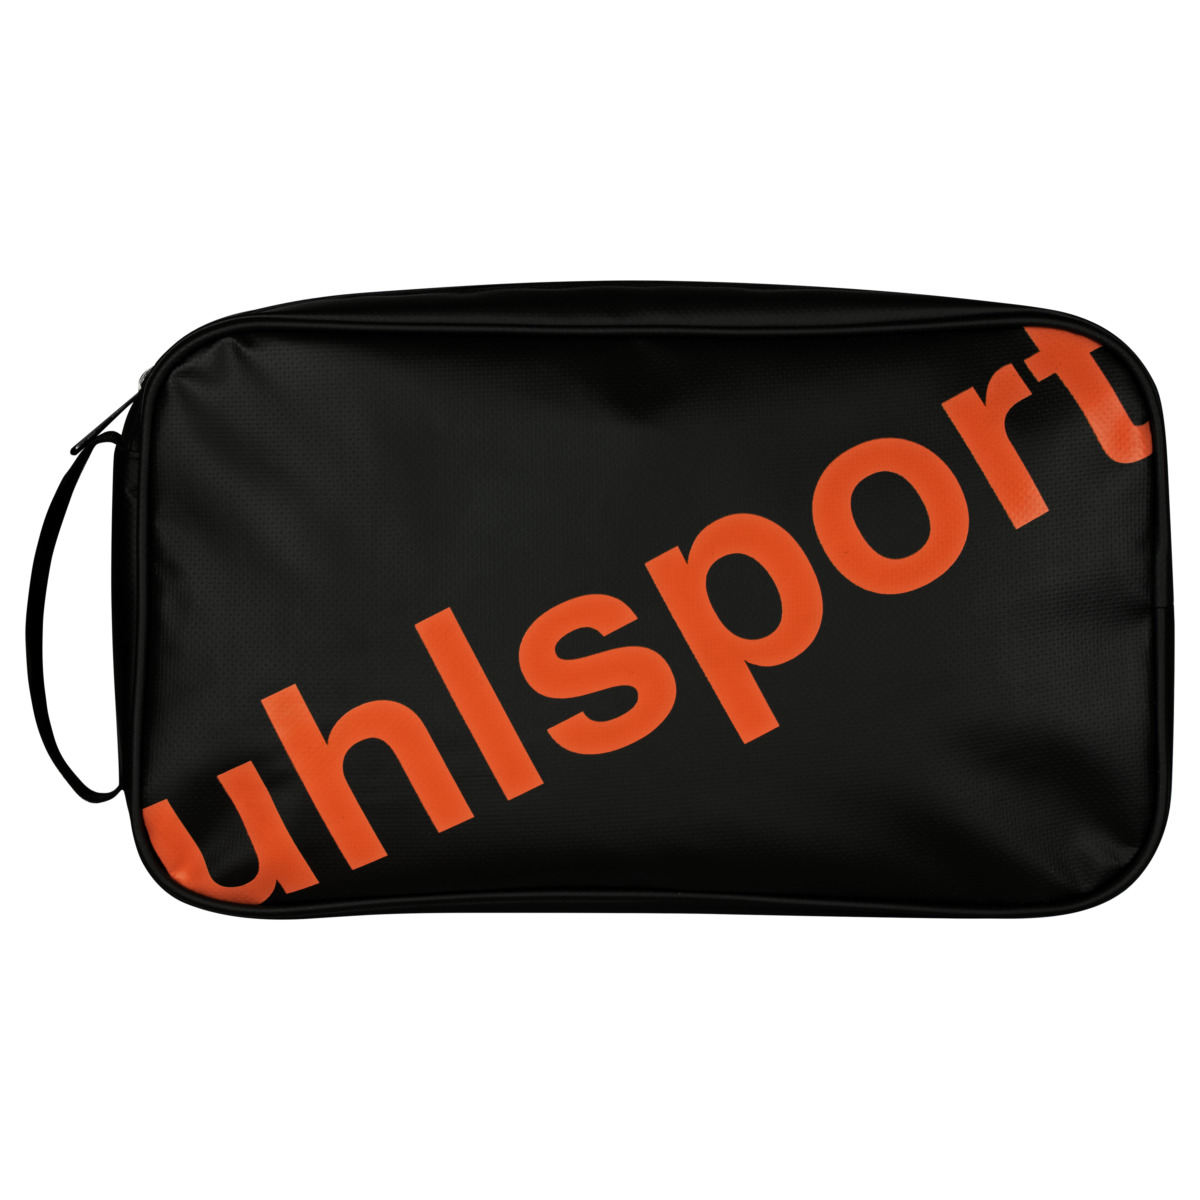 Uhlsport Unisex Adult Essential 2.0 Players Sport Bag Anthracite/Fluo Yellow Large 